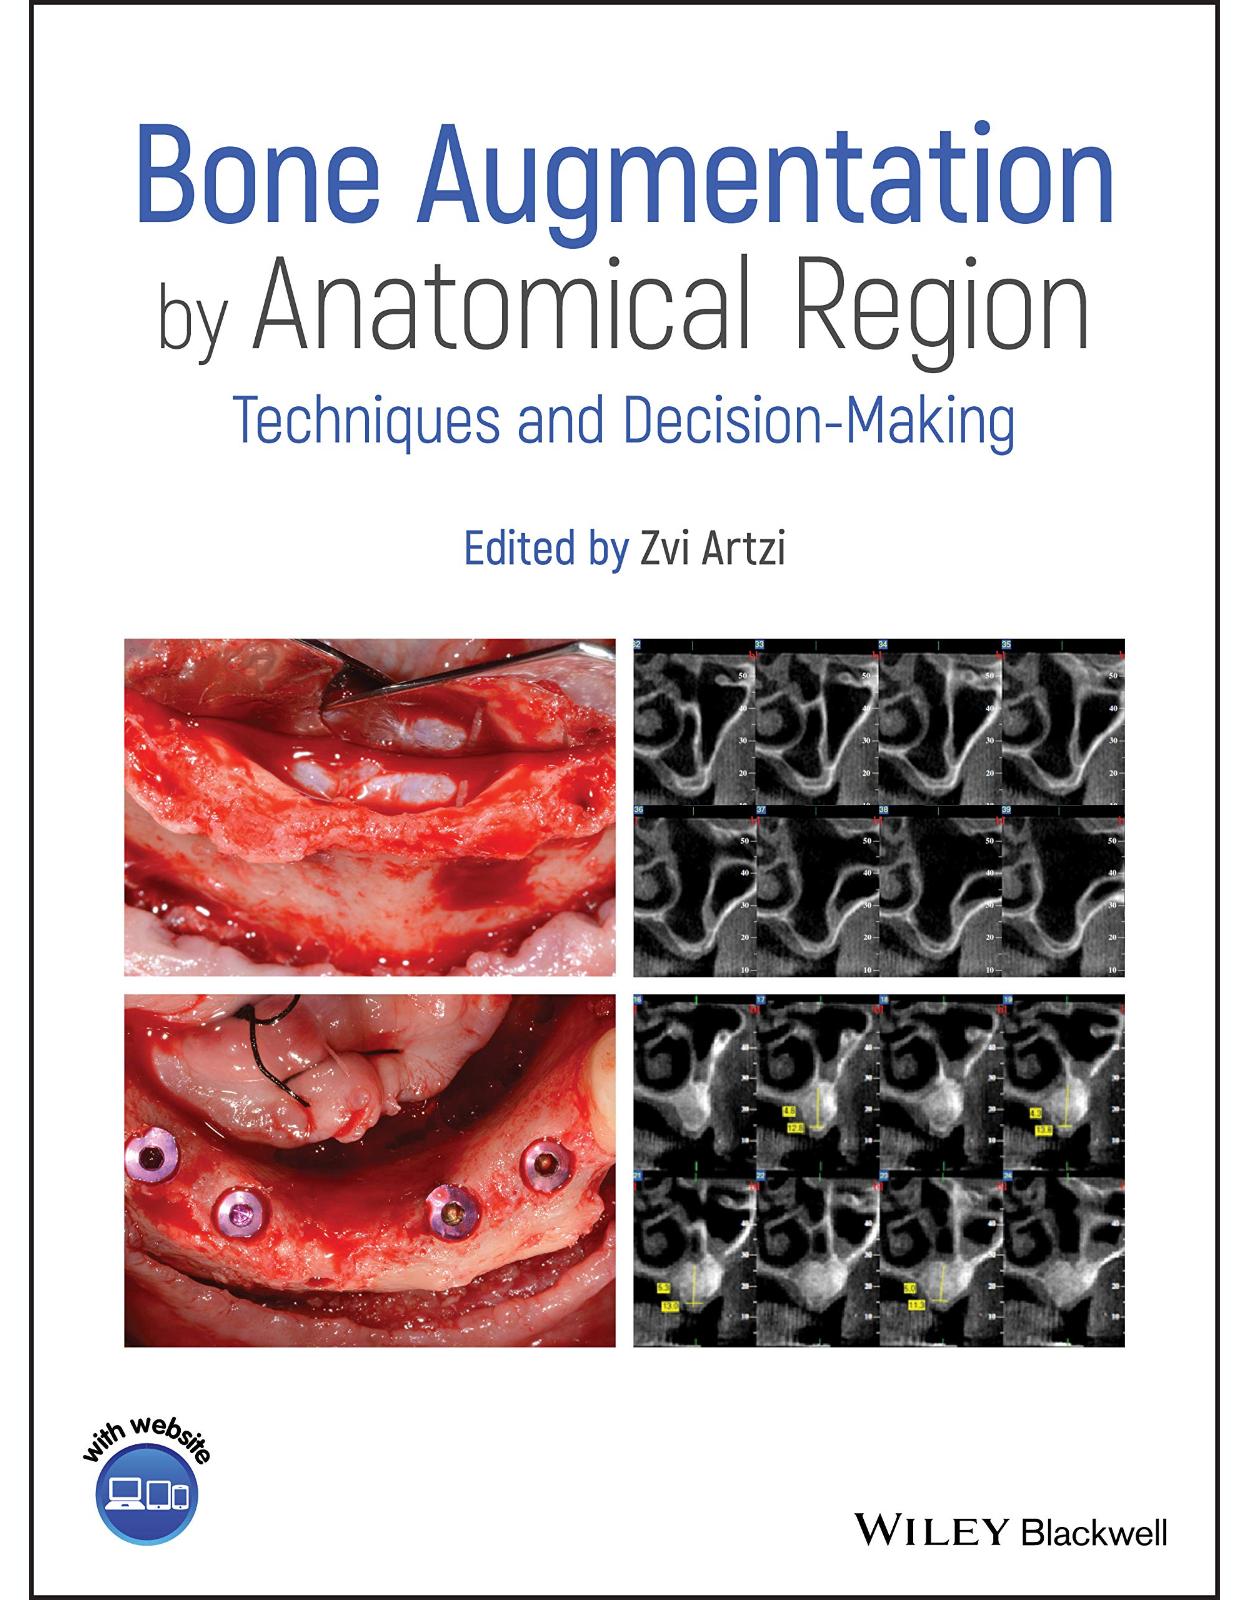 Bone Augmentation by Anatomical Region: Techniques and Decision-Making